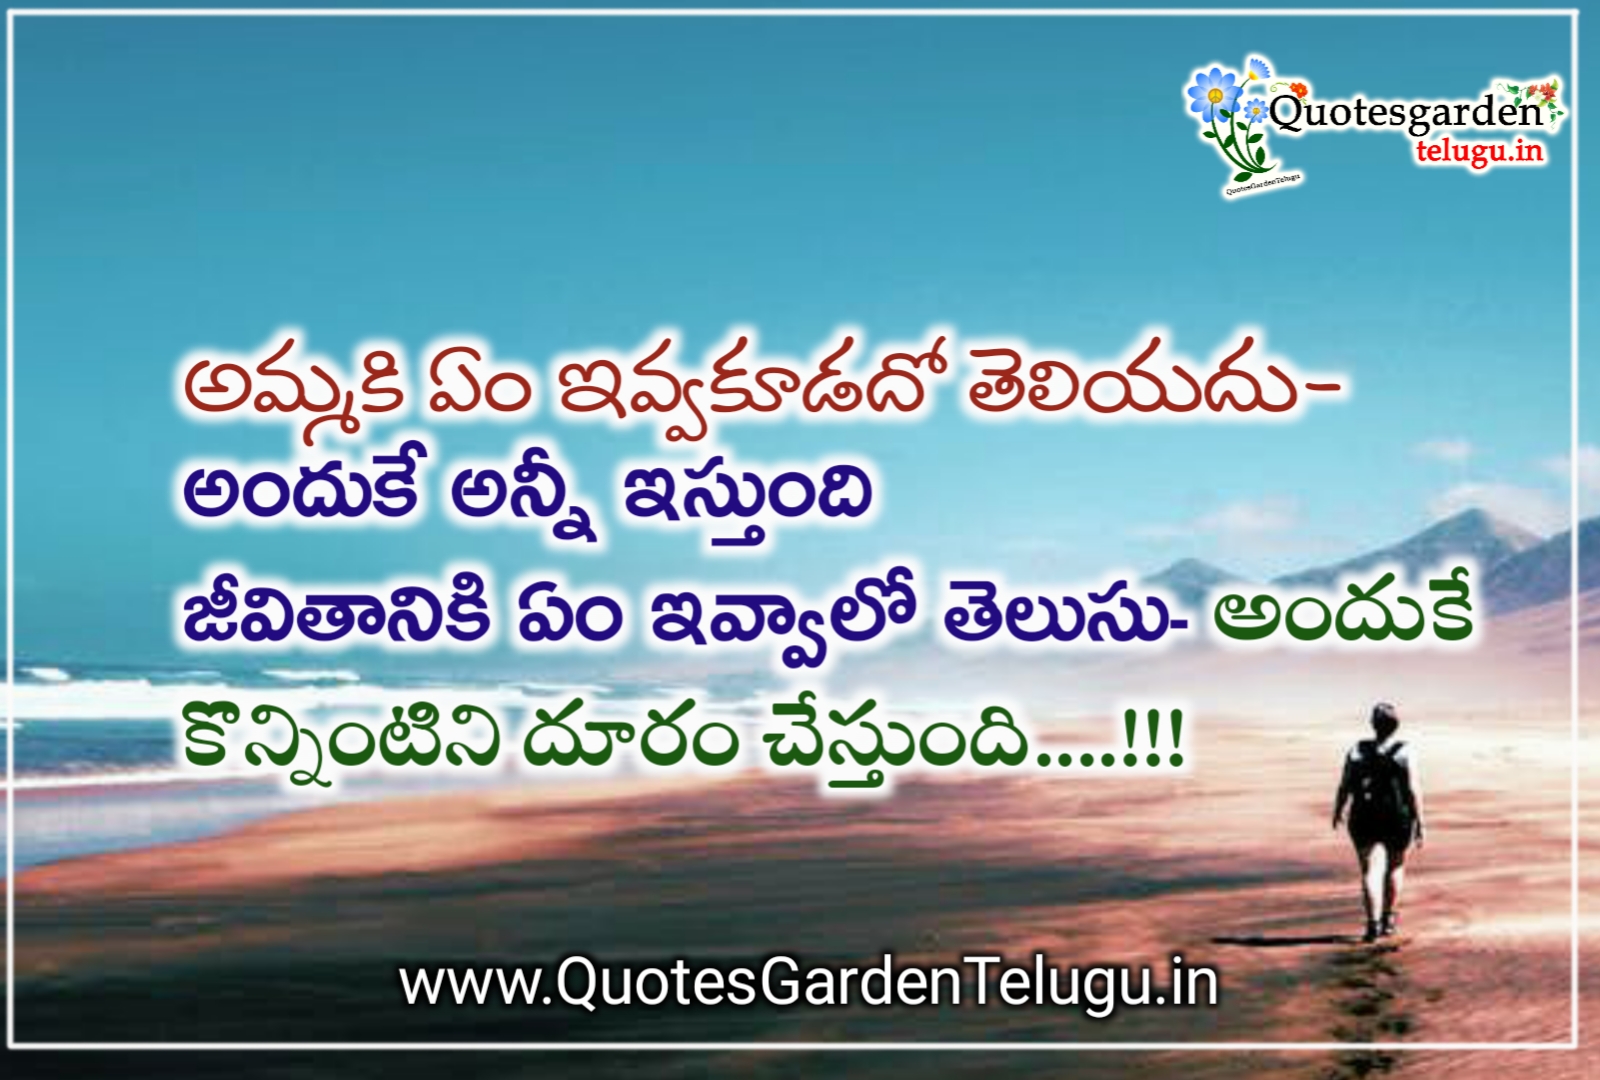 online telugu quotations on love and life free download photos ...